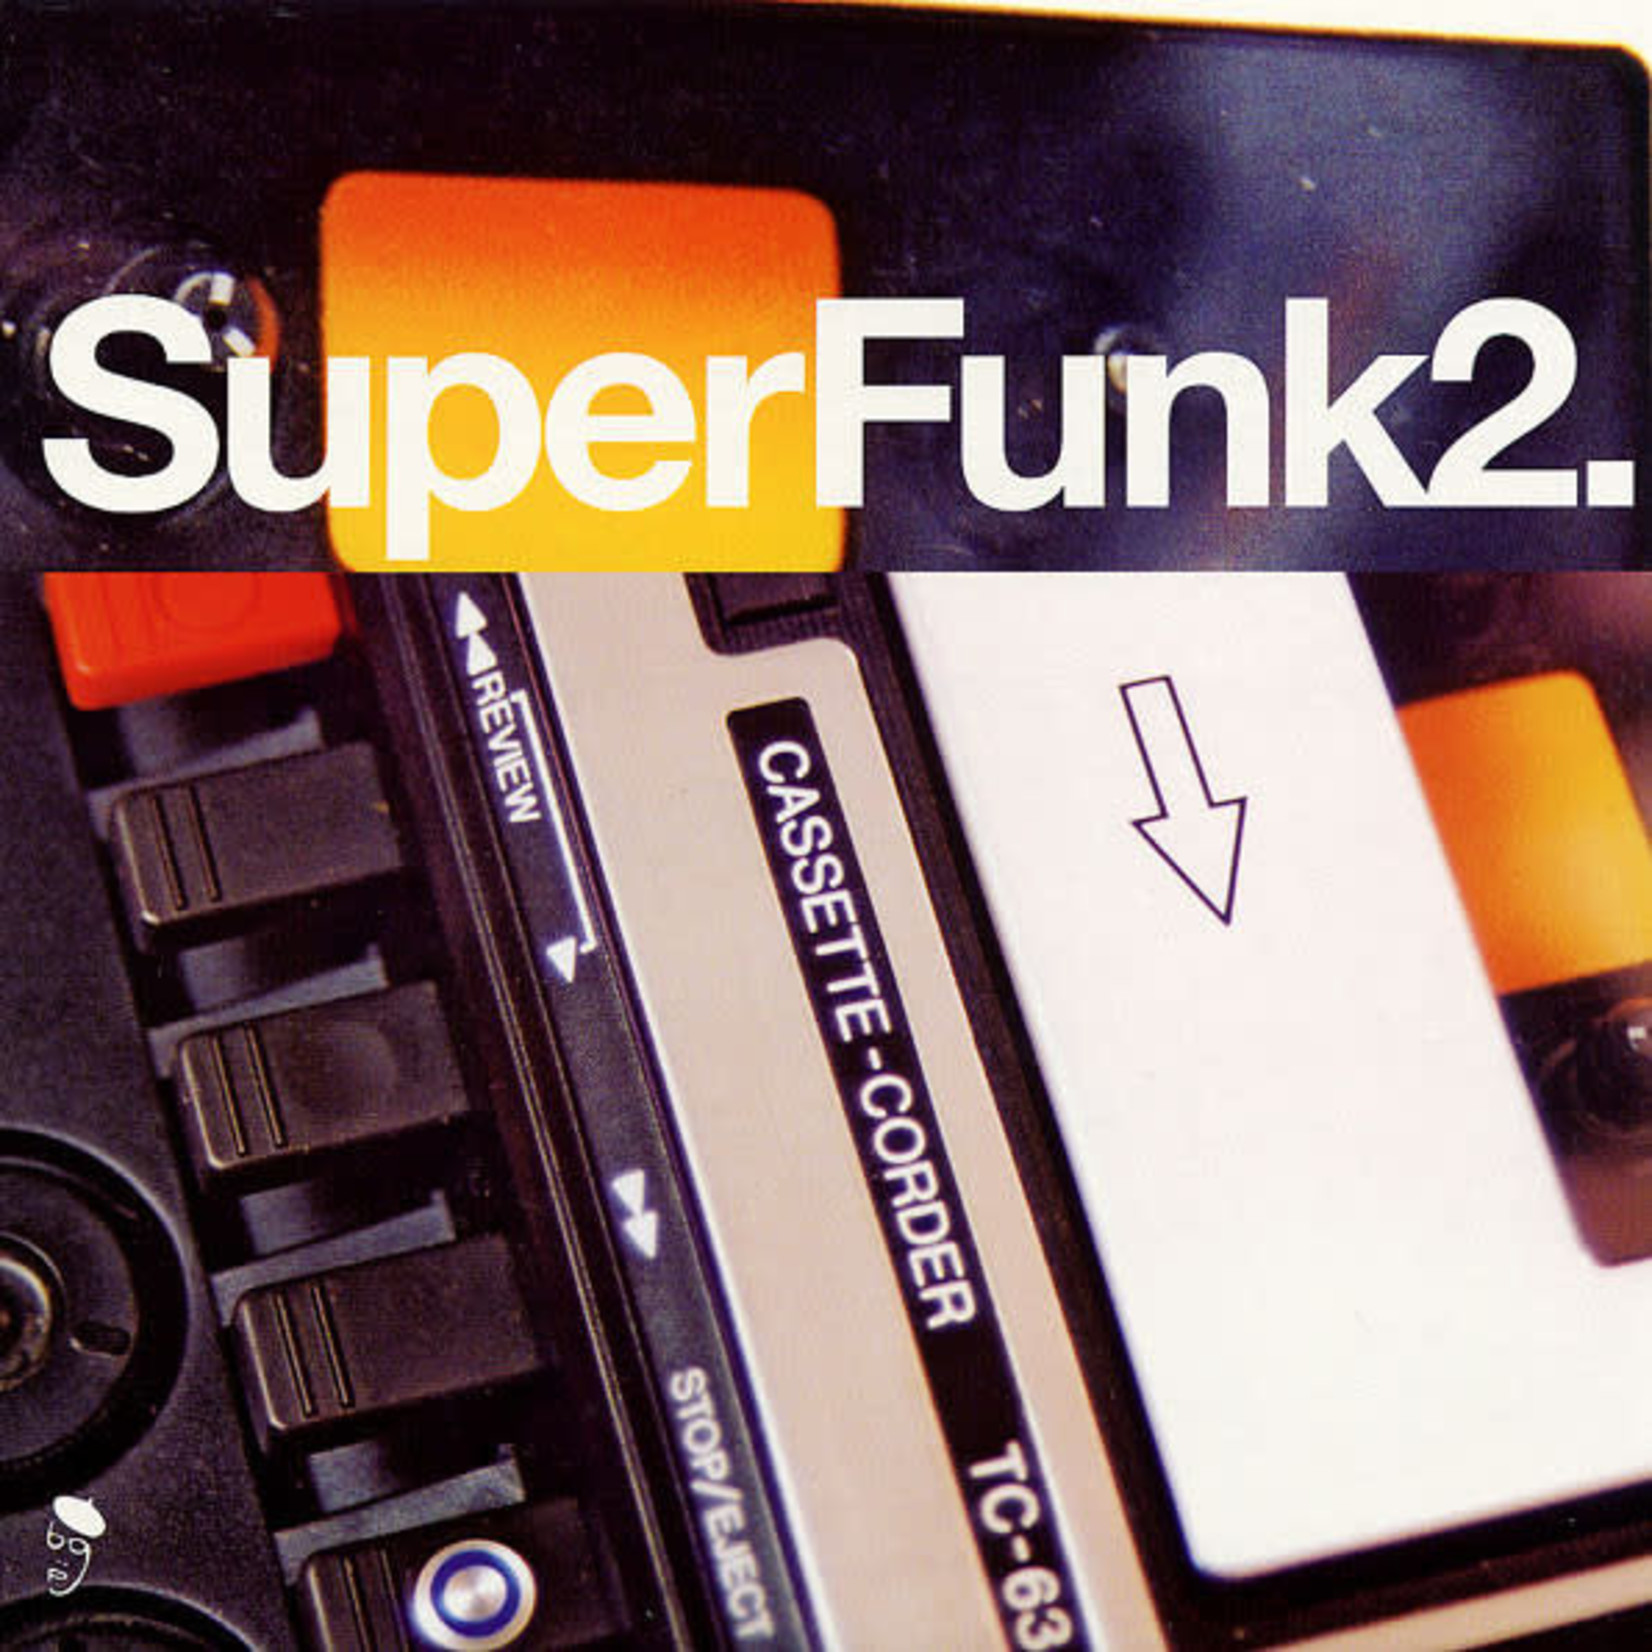 [New] Various Artists - Superfunk 2 - Rare Funk From Deep in the Crates (2LP)